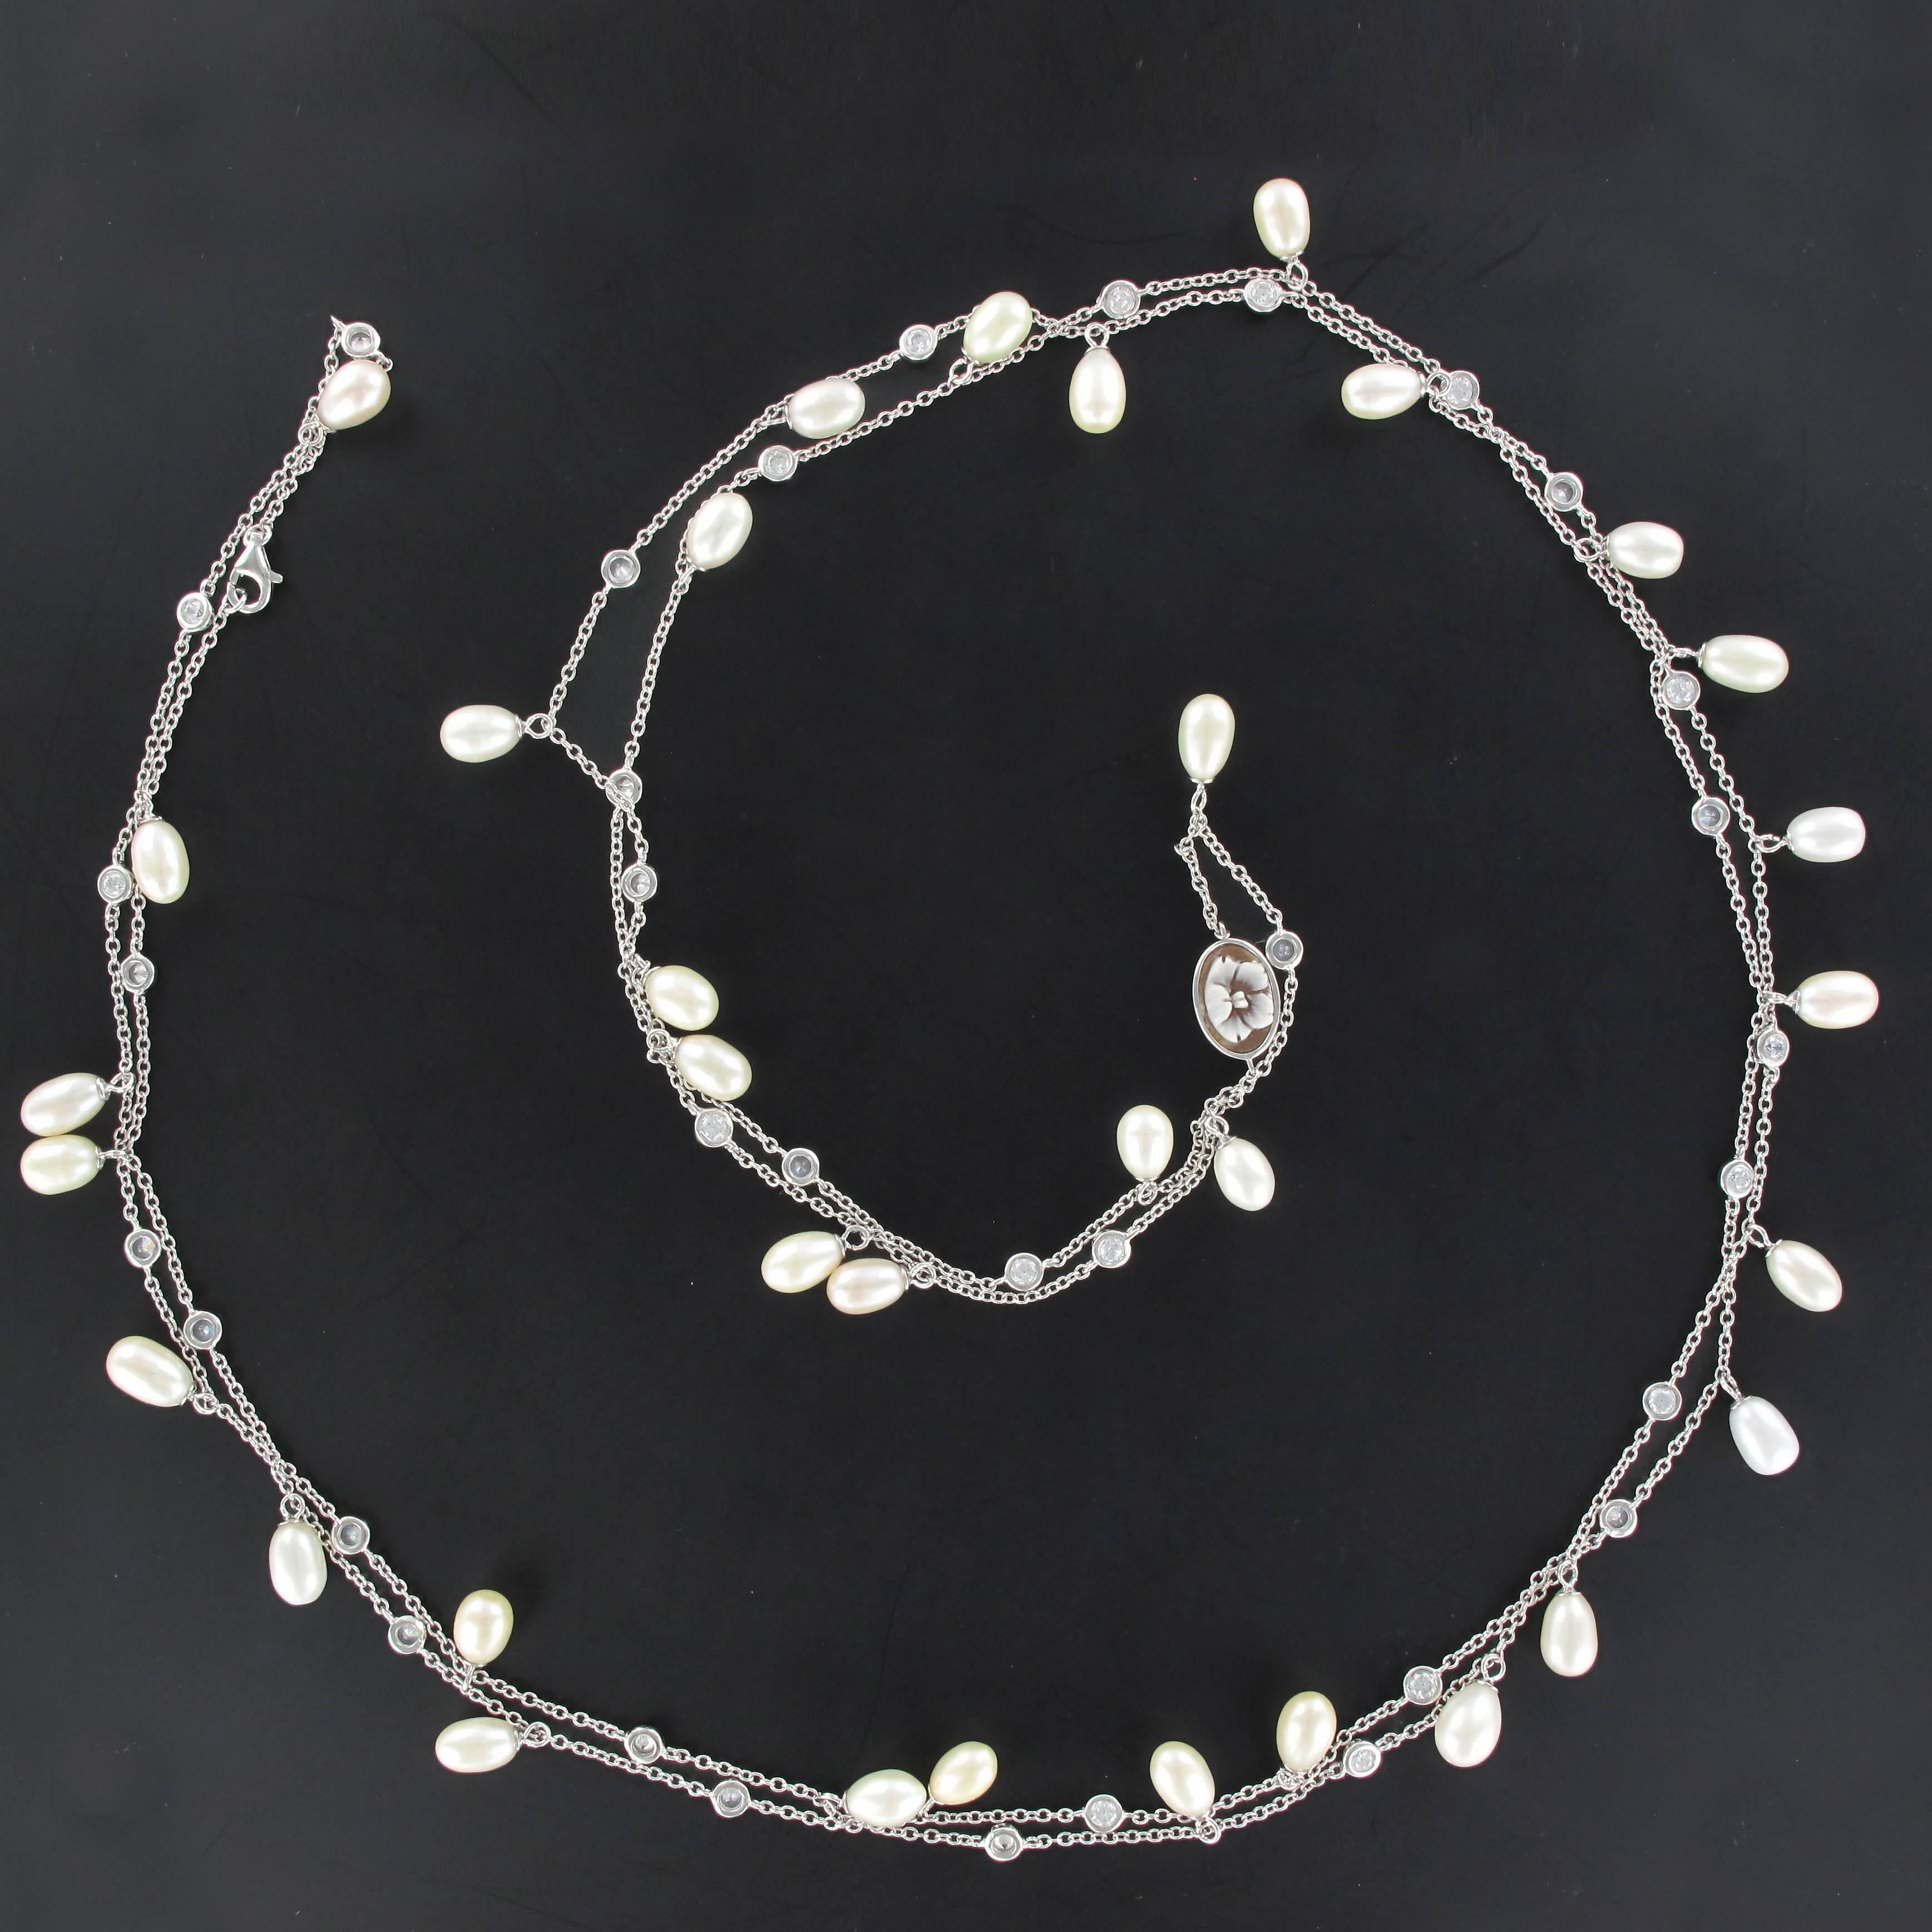 Modern Italian White Vermeil Cultured Pearls Crystals Cameo Long Necklace